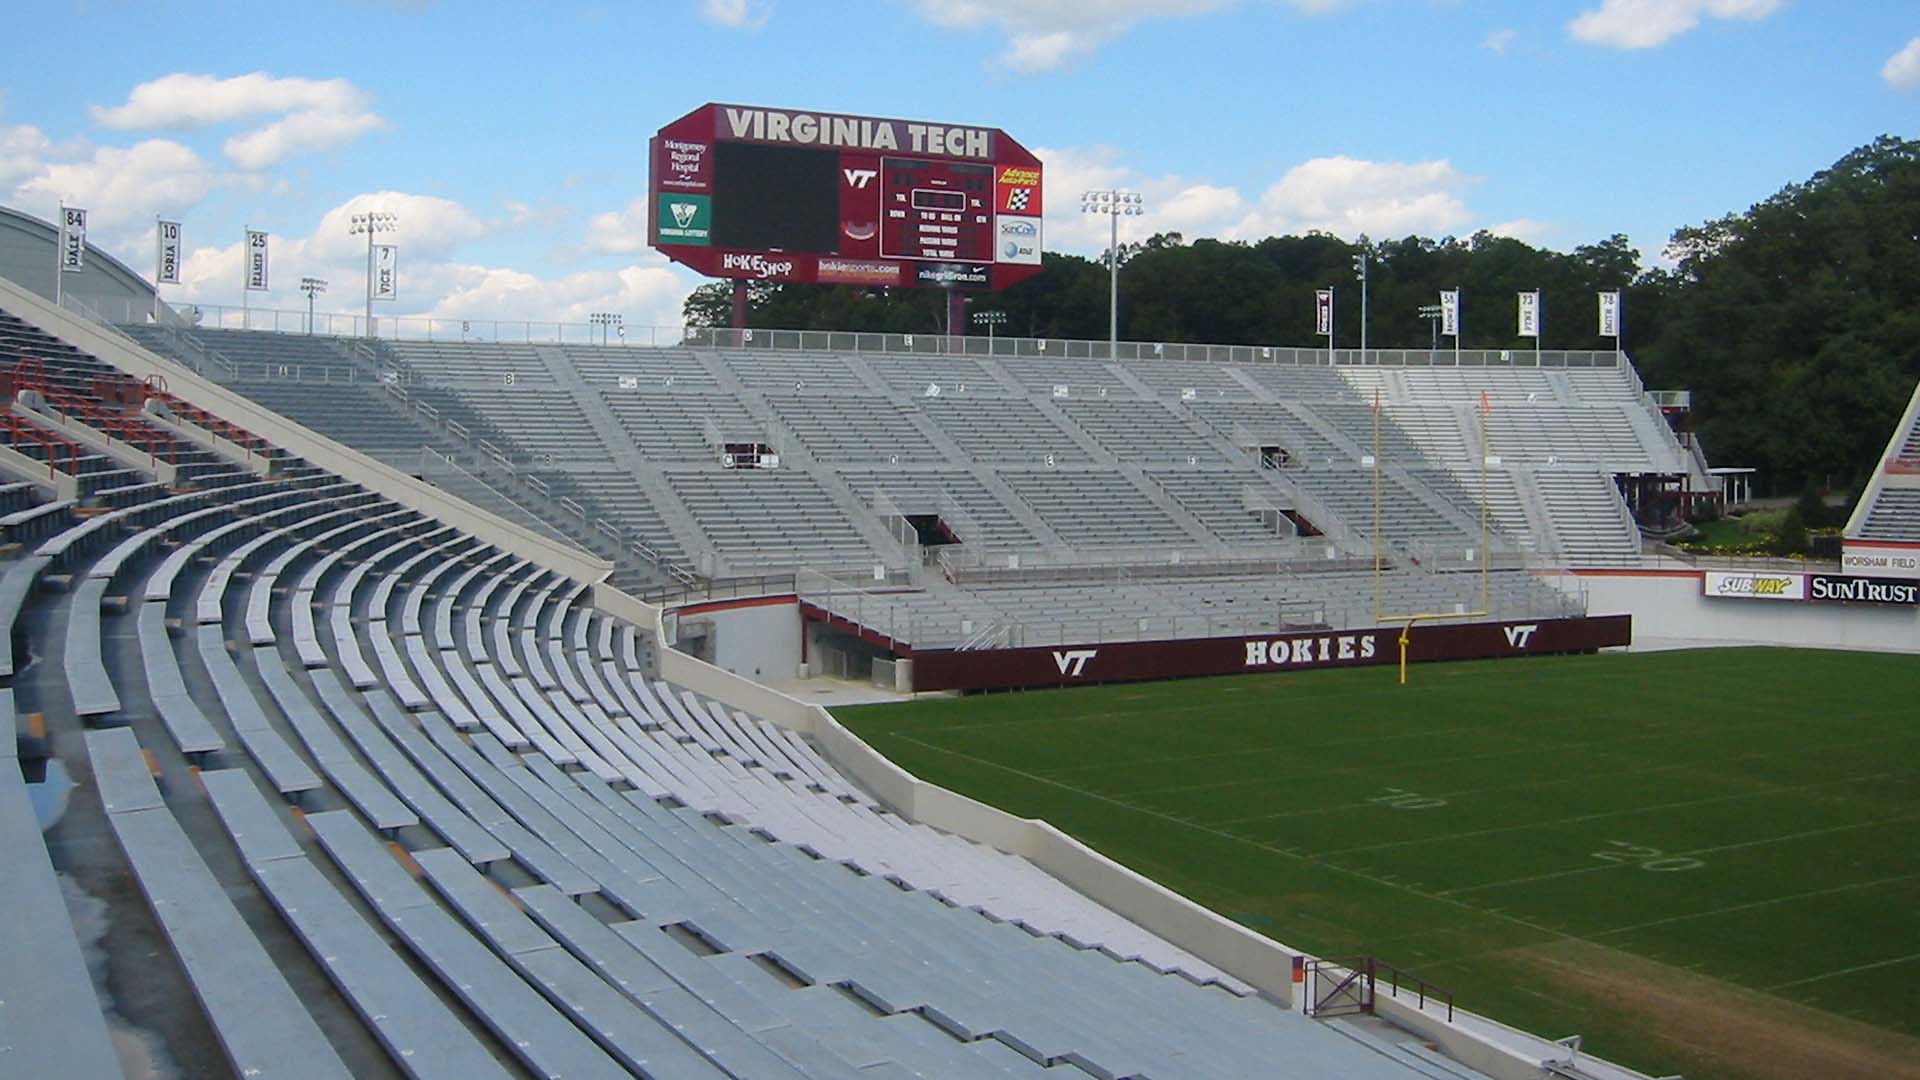 Close-up view of Lane Stadium bleacher seats and decking system.